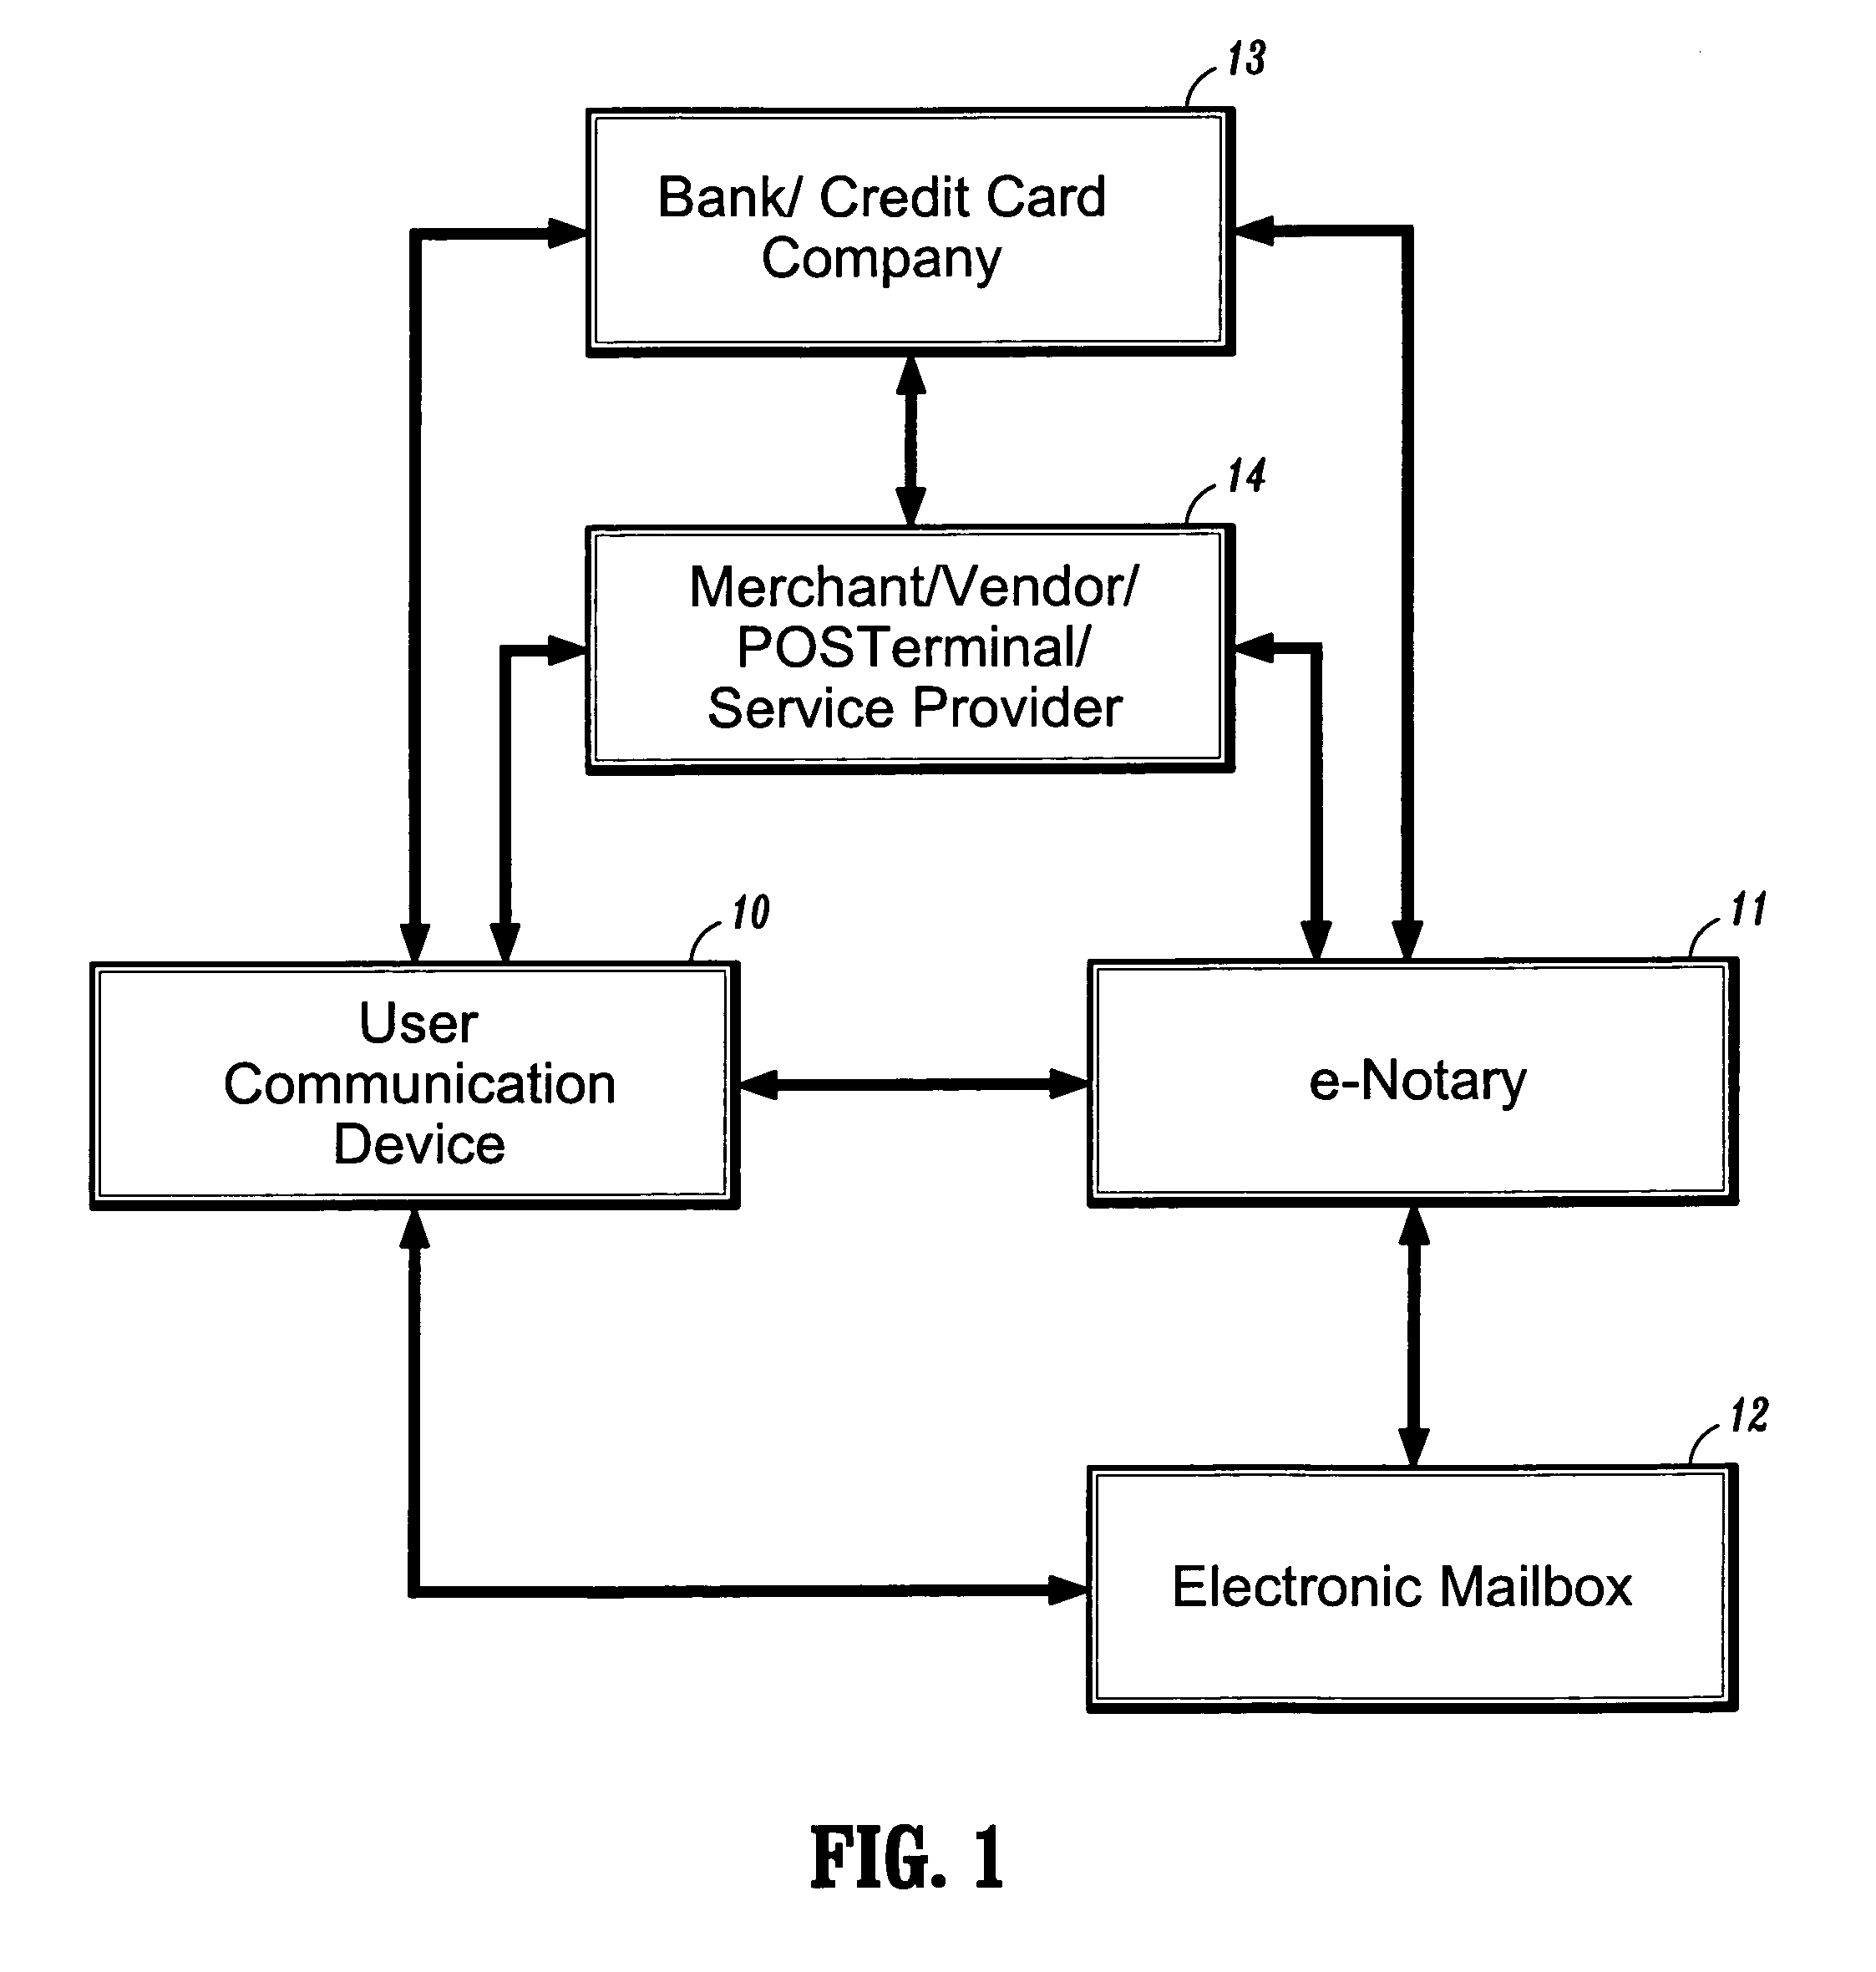 System and method for confirming electronic transactions